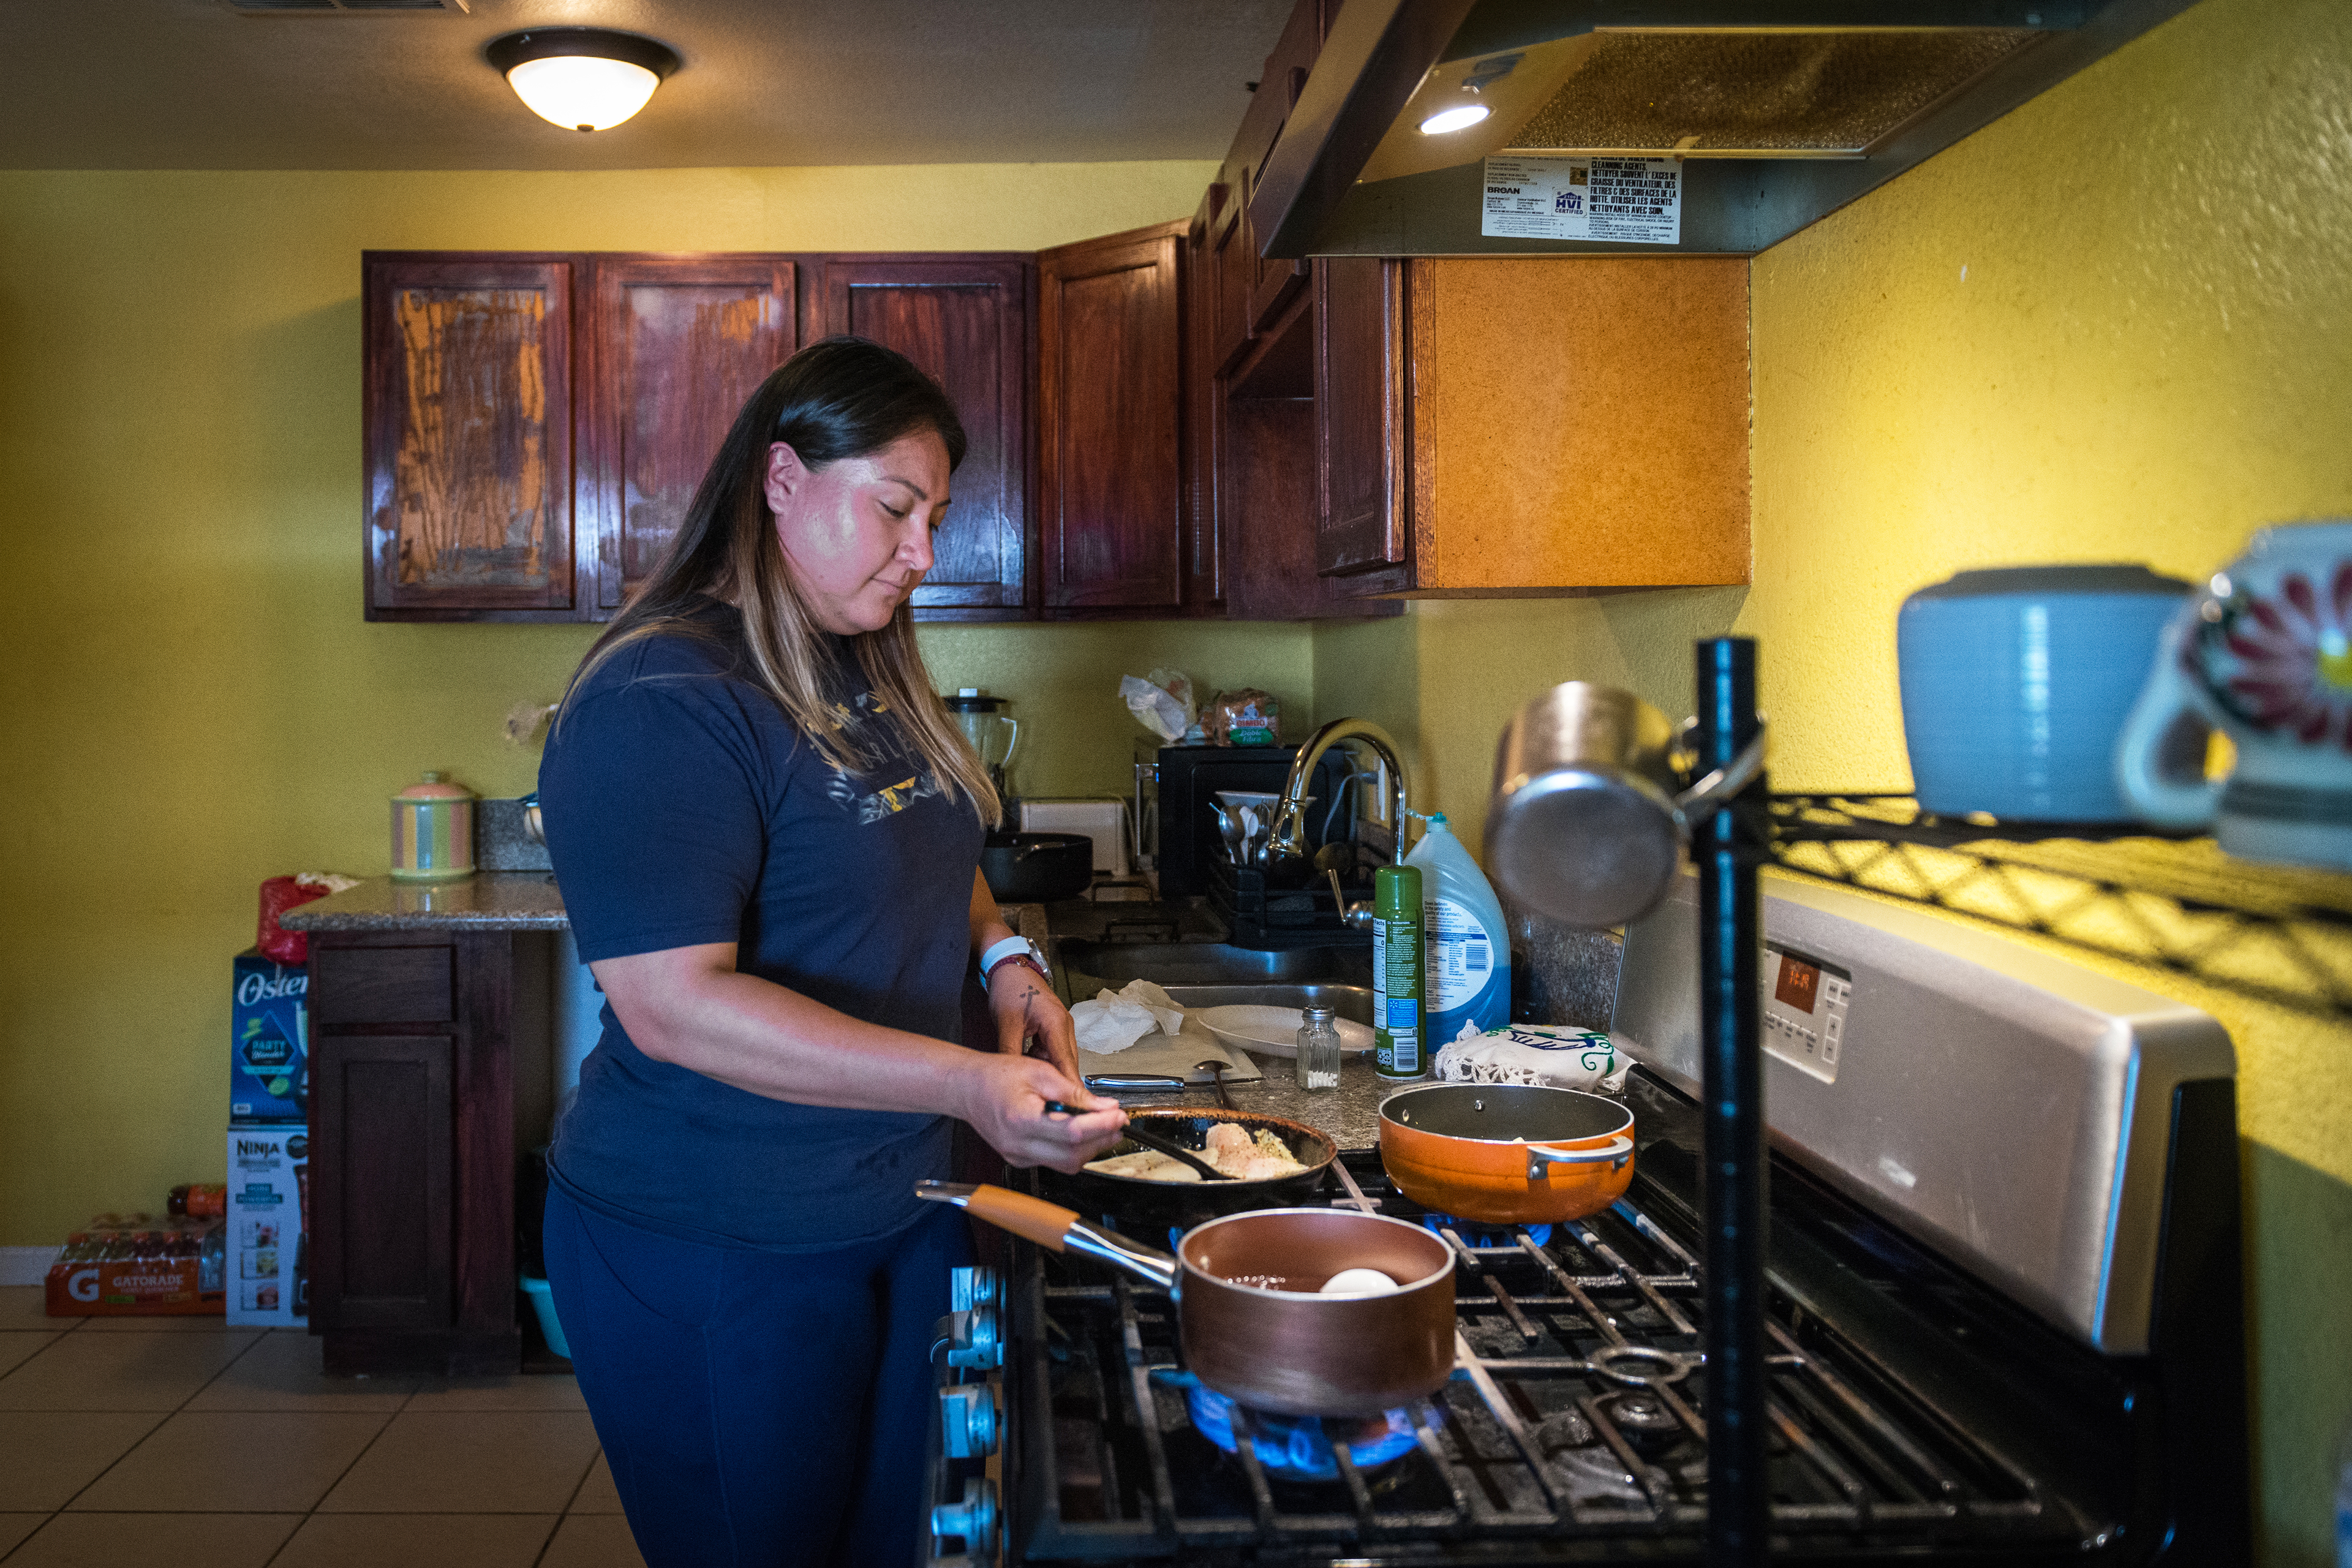 A photo shows Maria Cruz cooking on a stovetop in the kitchen.